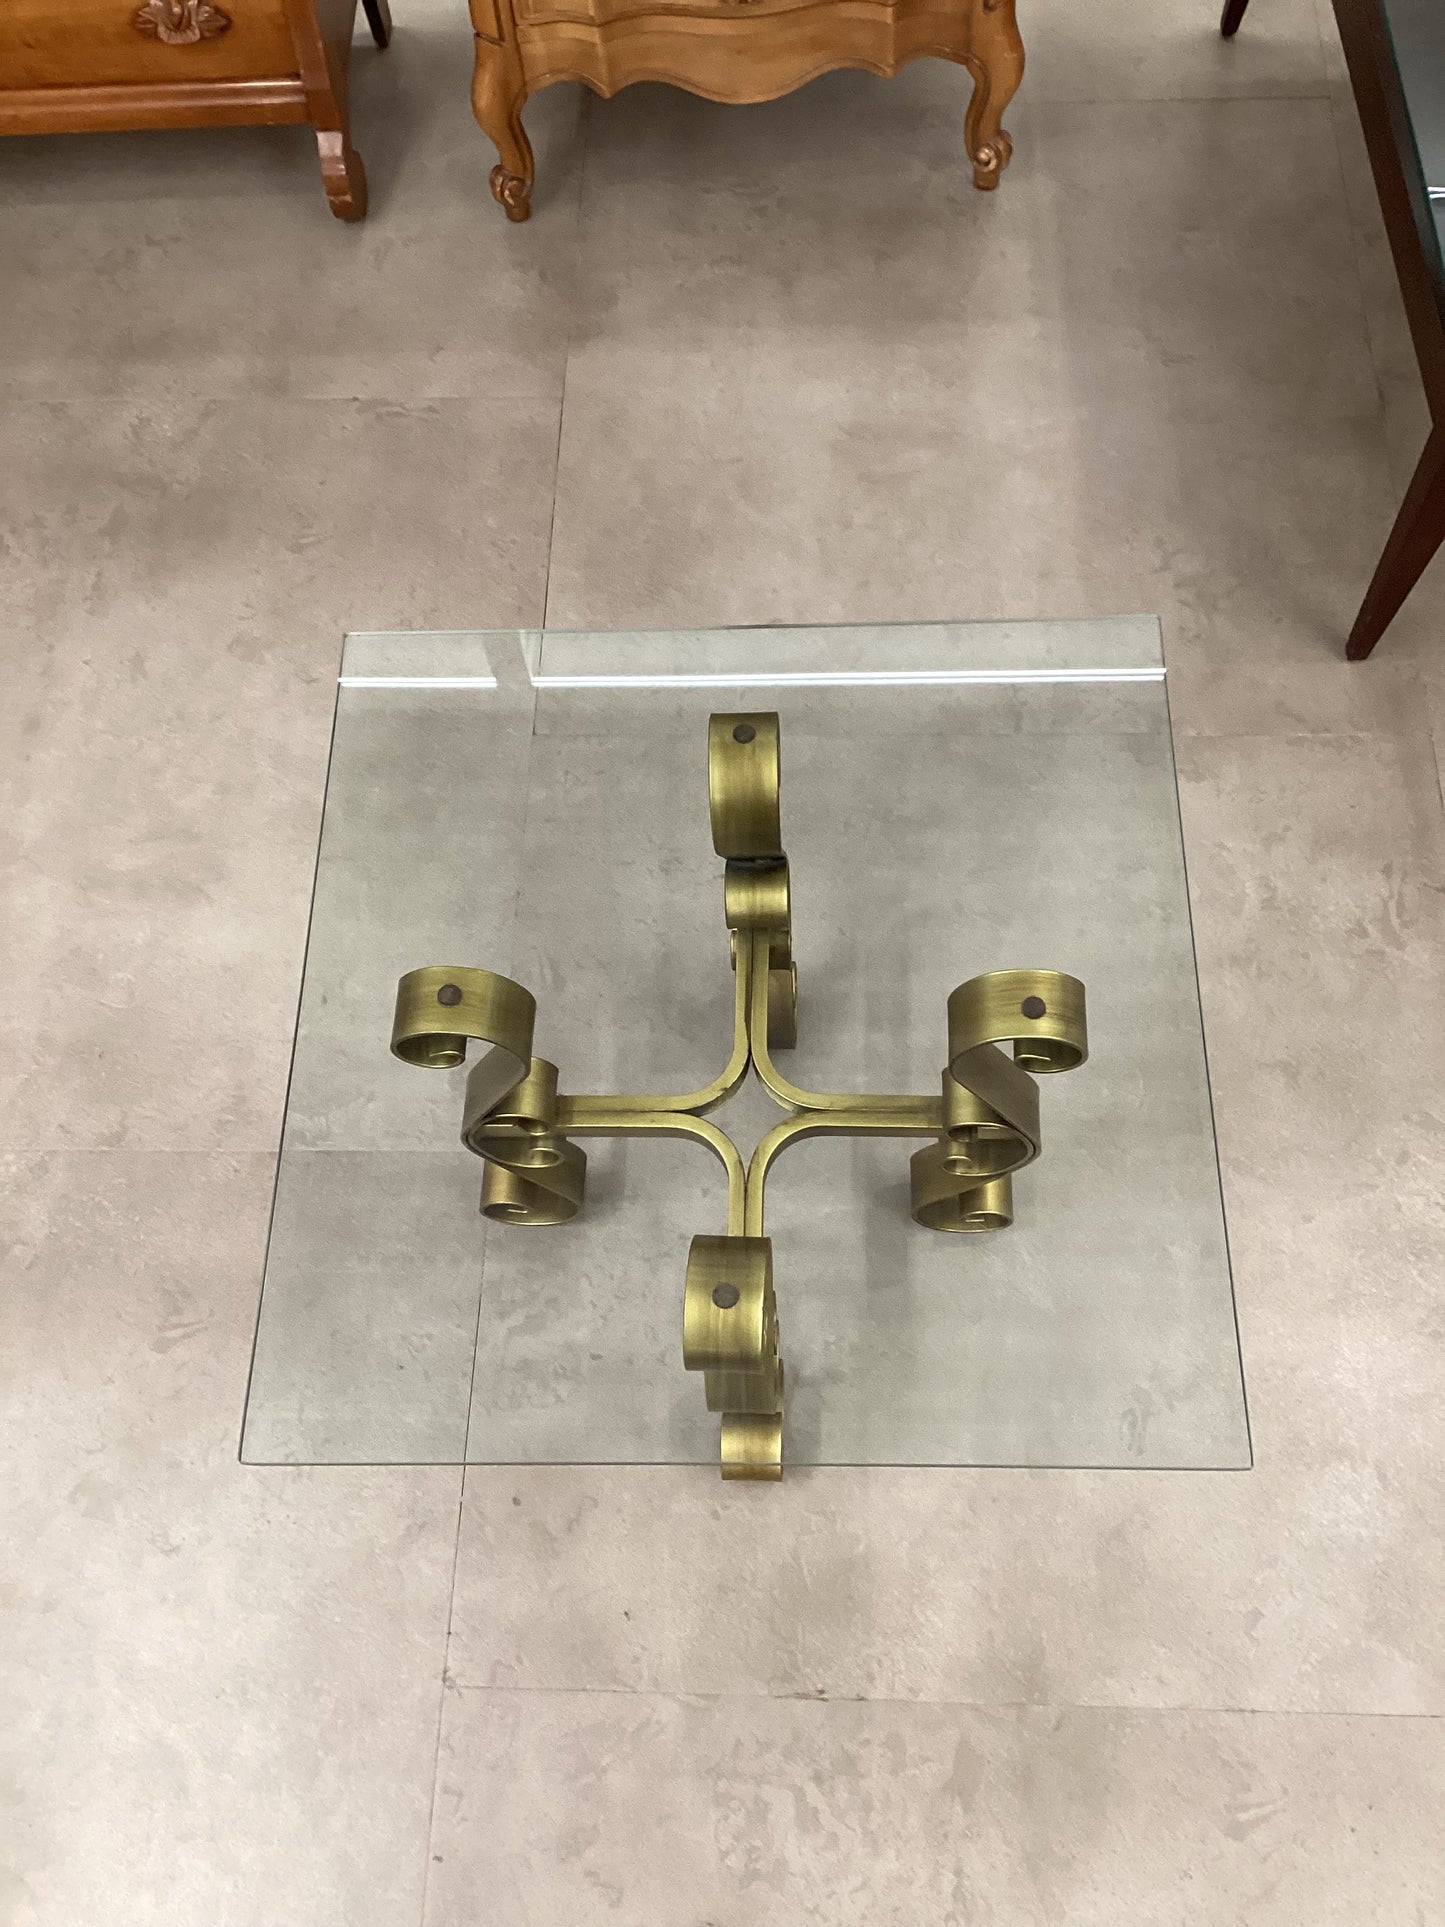 Glass Top Accent Table